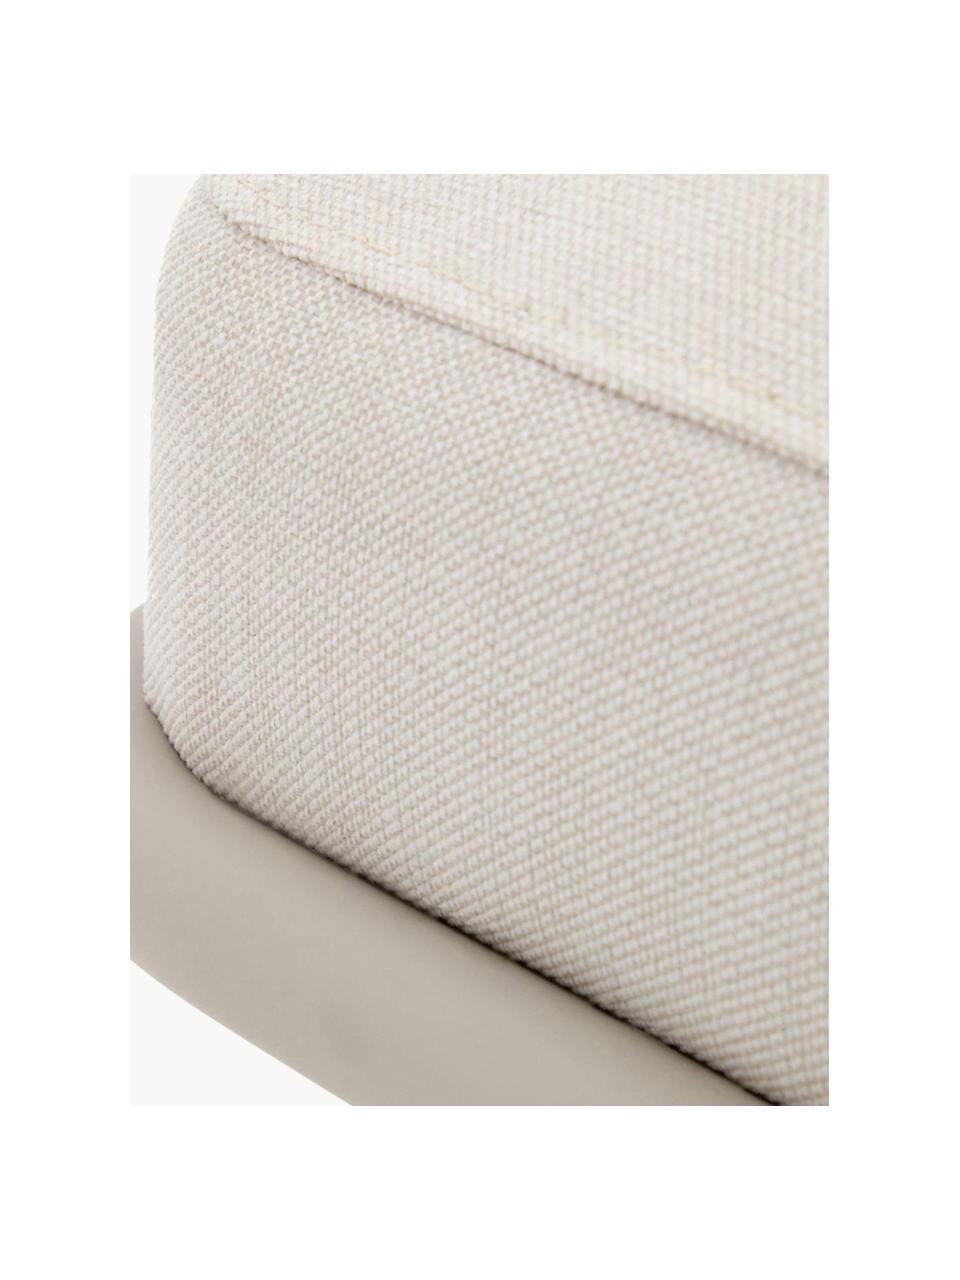 Chenille-Polsterbank Compo, Bezug: Chenille (100 % Polyester, Gestell: Metall, lackiert, Chenille Hellbeige, Greige, B 130 x T 44 cm